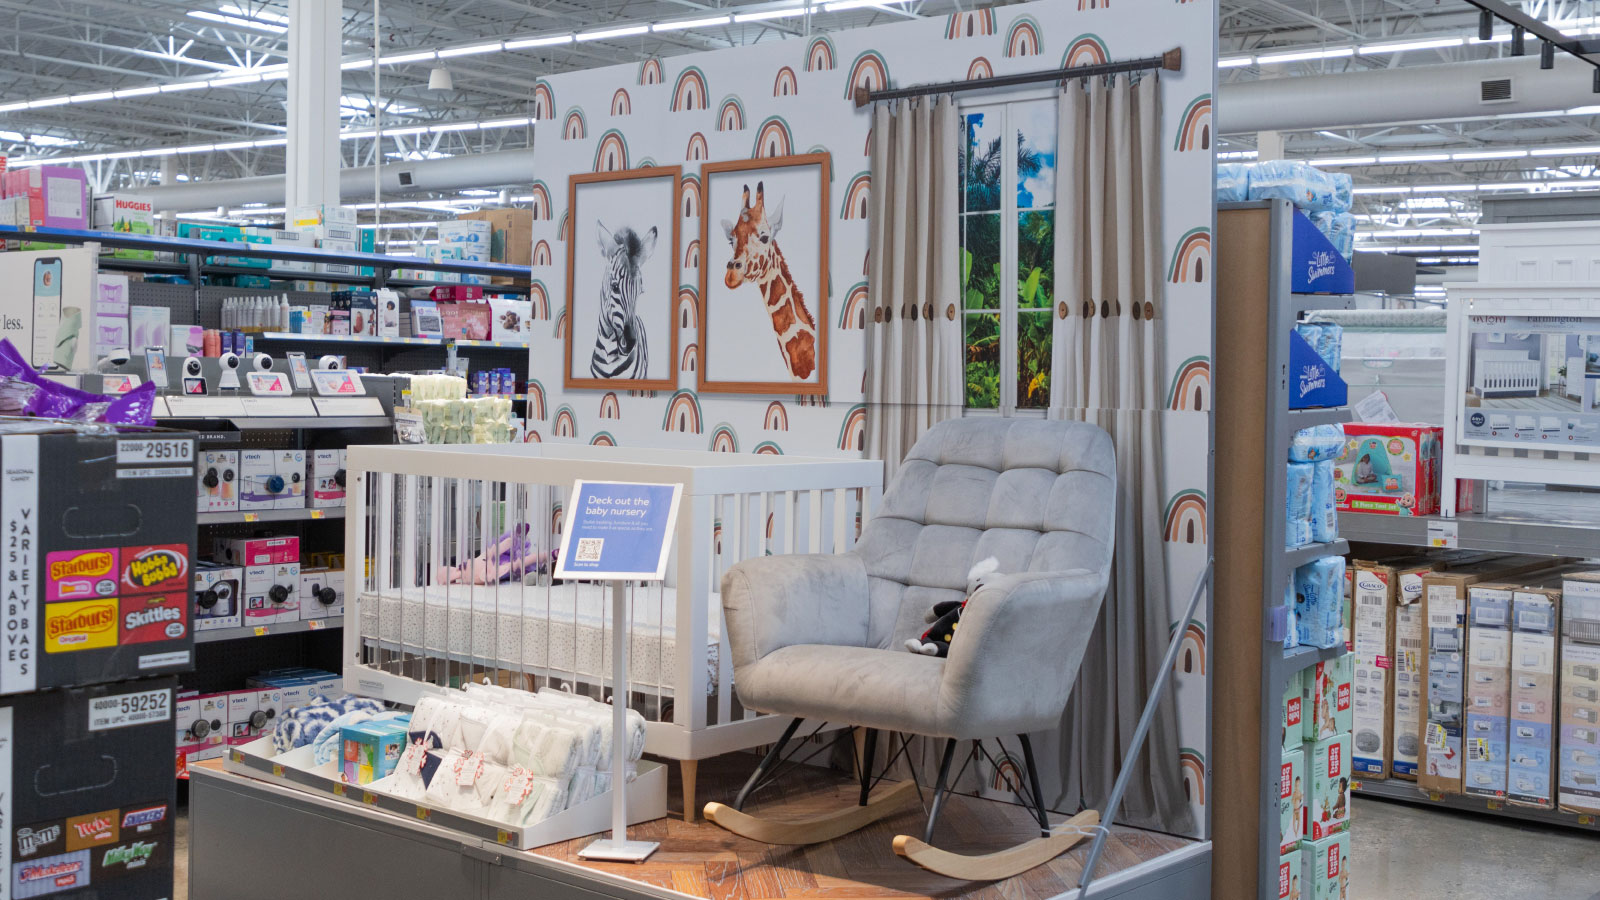 Nursery decor display in store home department showing crib, bedding and rocking chair.